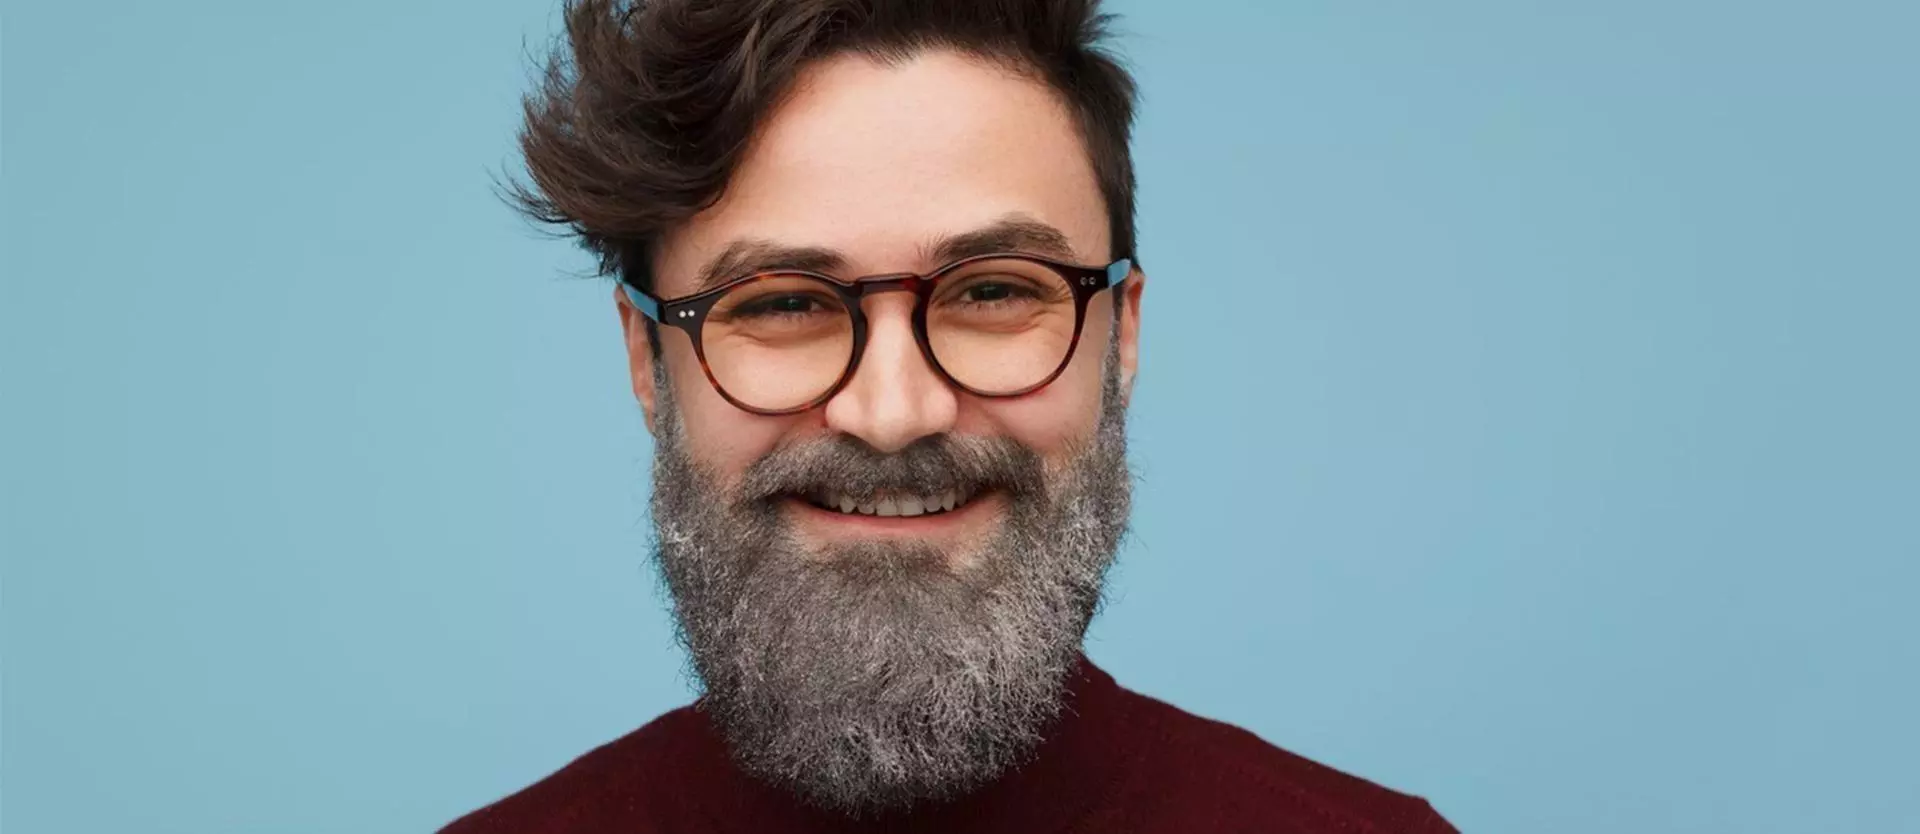 Why Are Some Men’s Beards a Different Color Than Their Hair? 